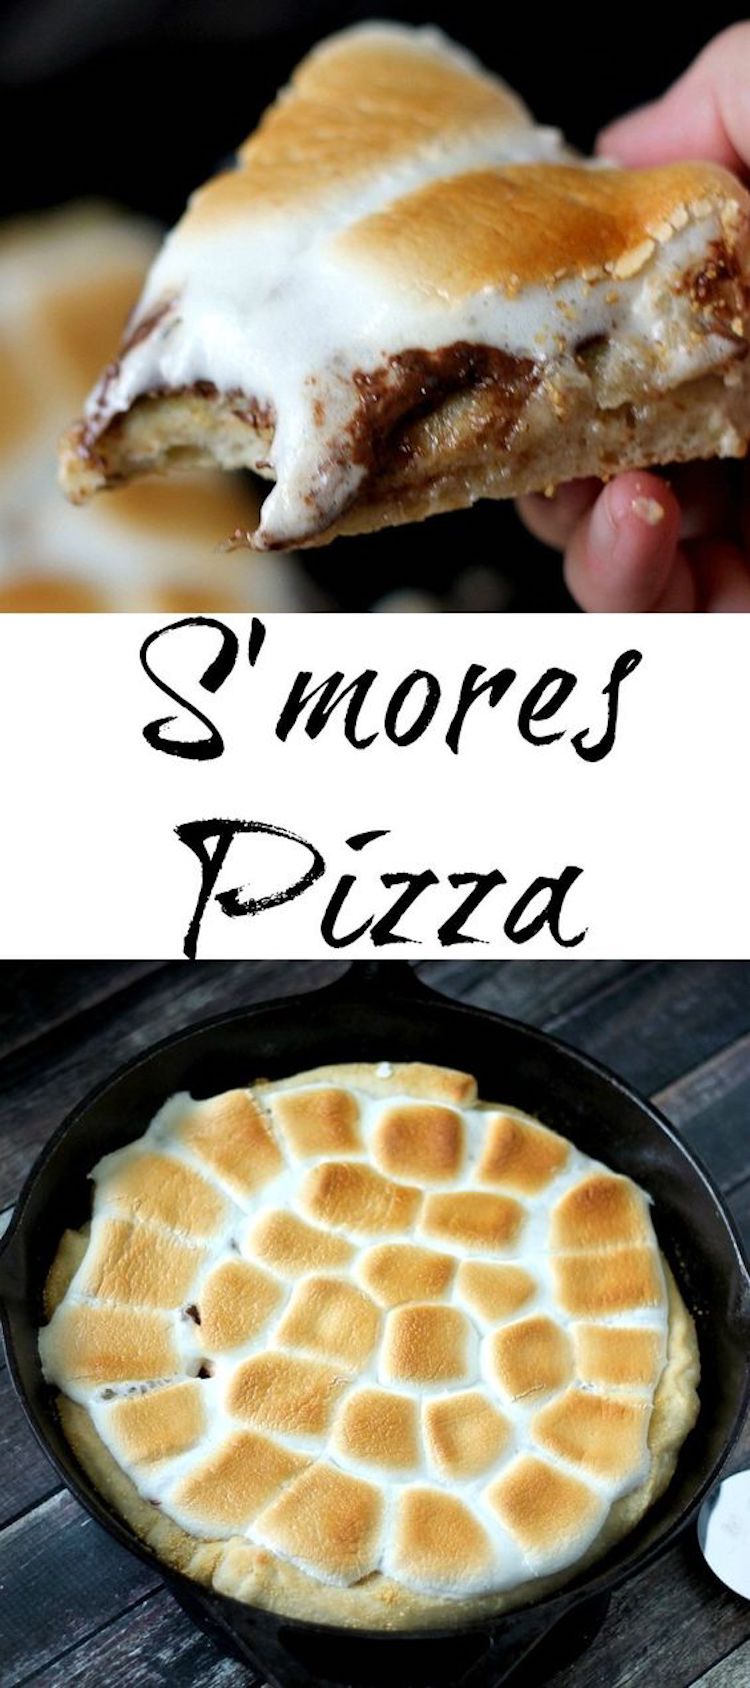 (ANOTHER) S’Mores Dessert Pizza Recipe